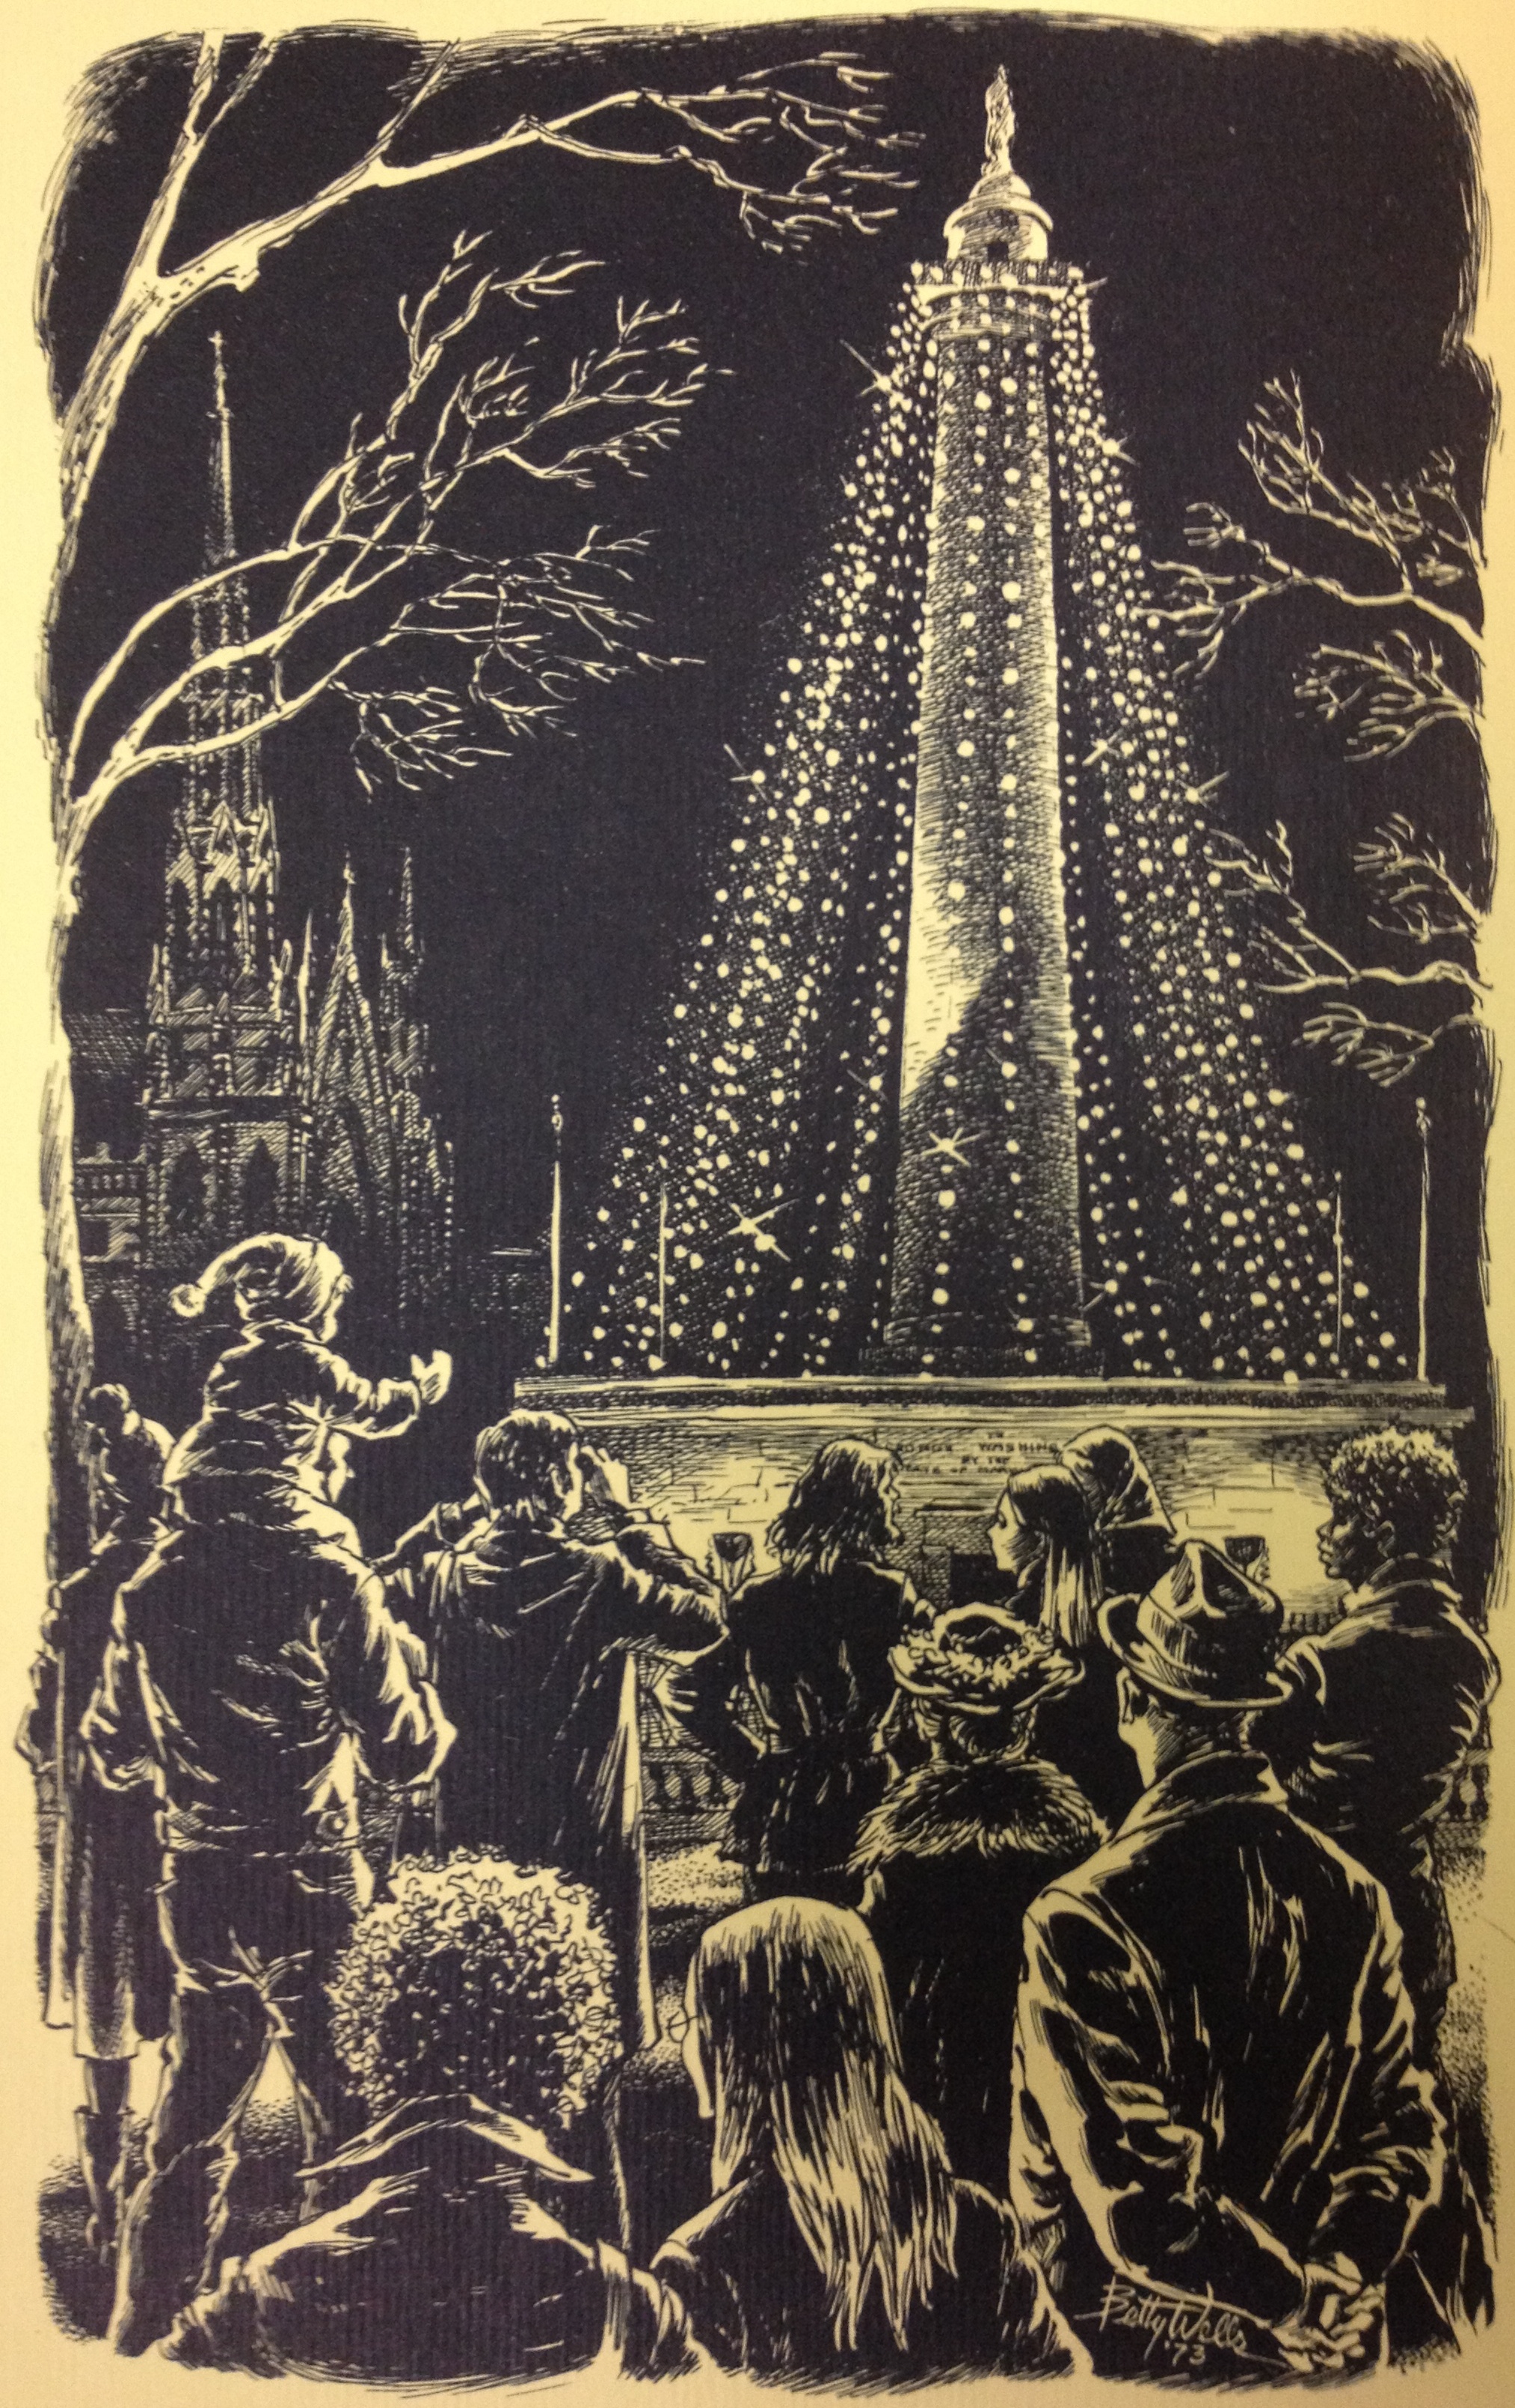 An image of the Washington Monument from Mayor Schaefer's 1973 holiday card. Original pen and ink drawn by Baltimoer artist Betty Wells. Ephemera, Series I, MdHS